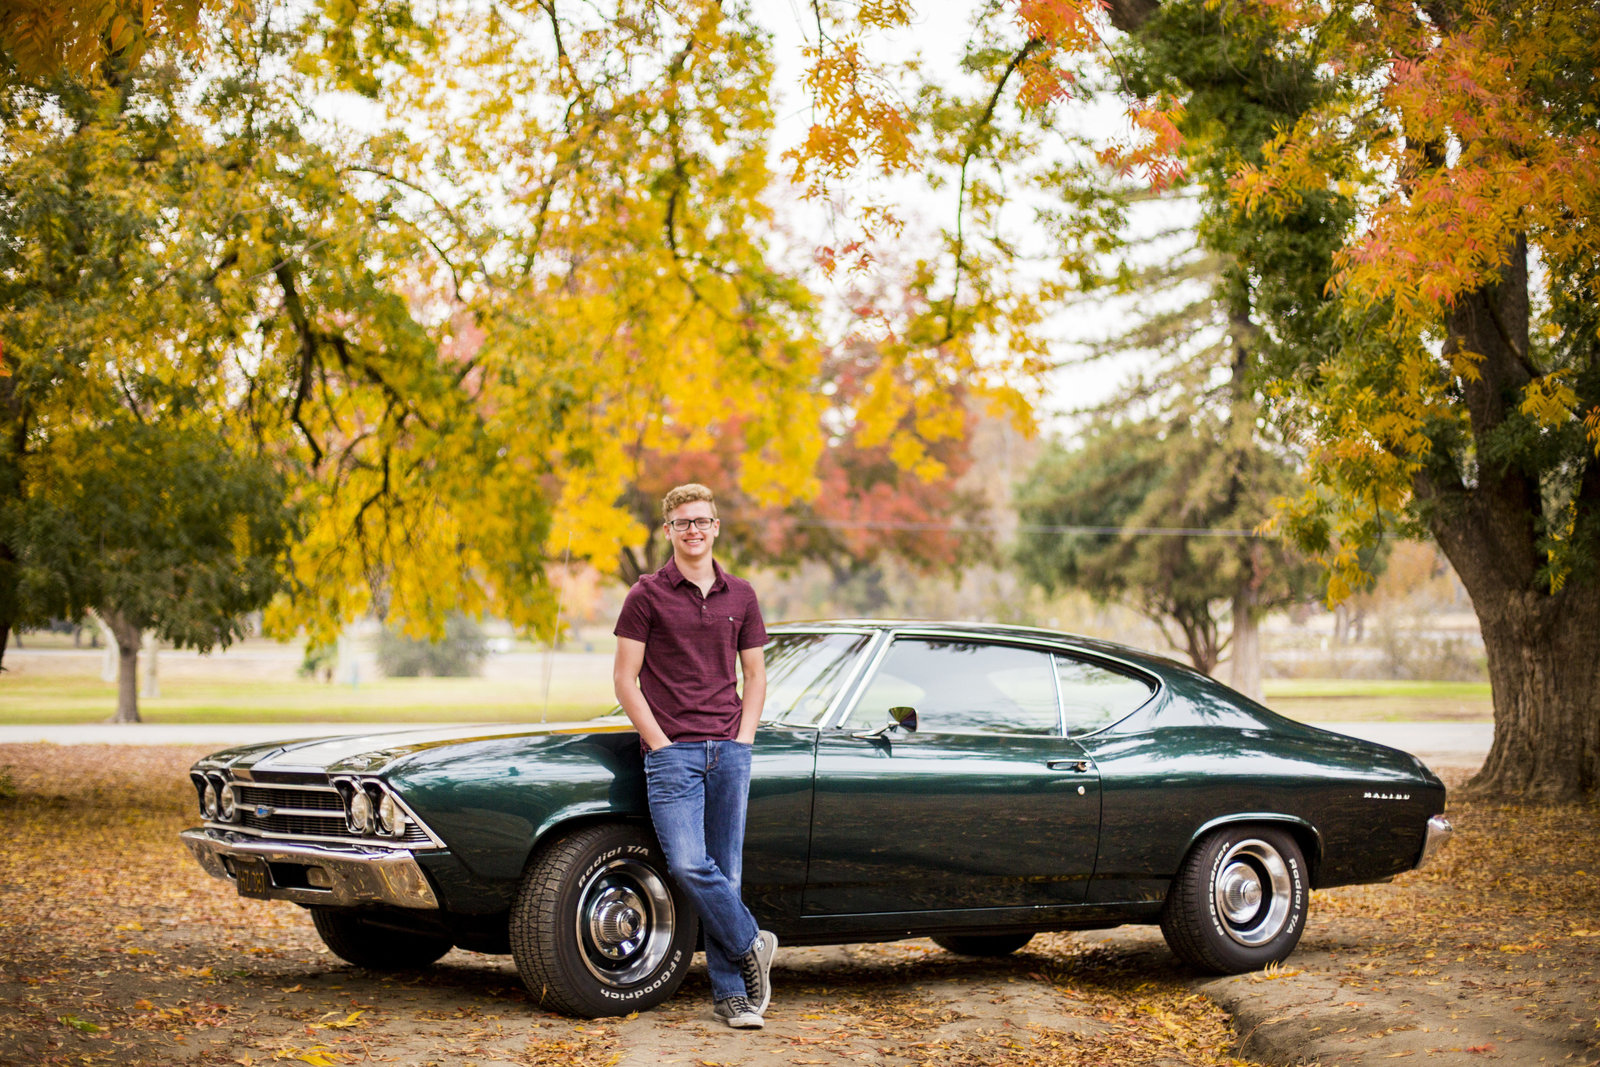 Senior Photography, senior boy standing in front of classic muscle car